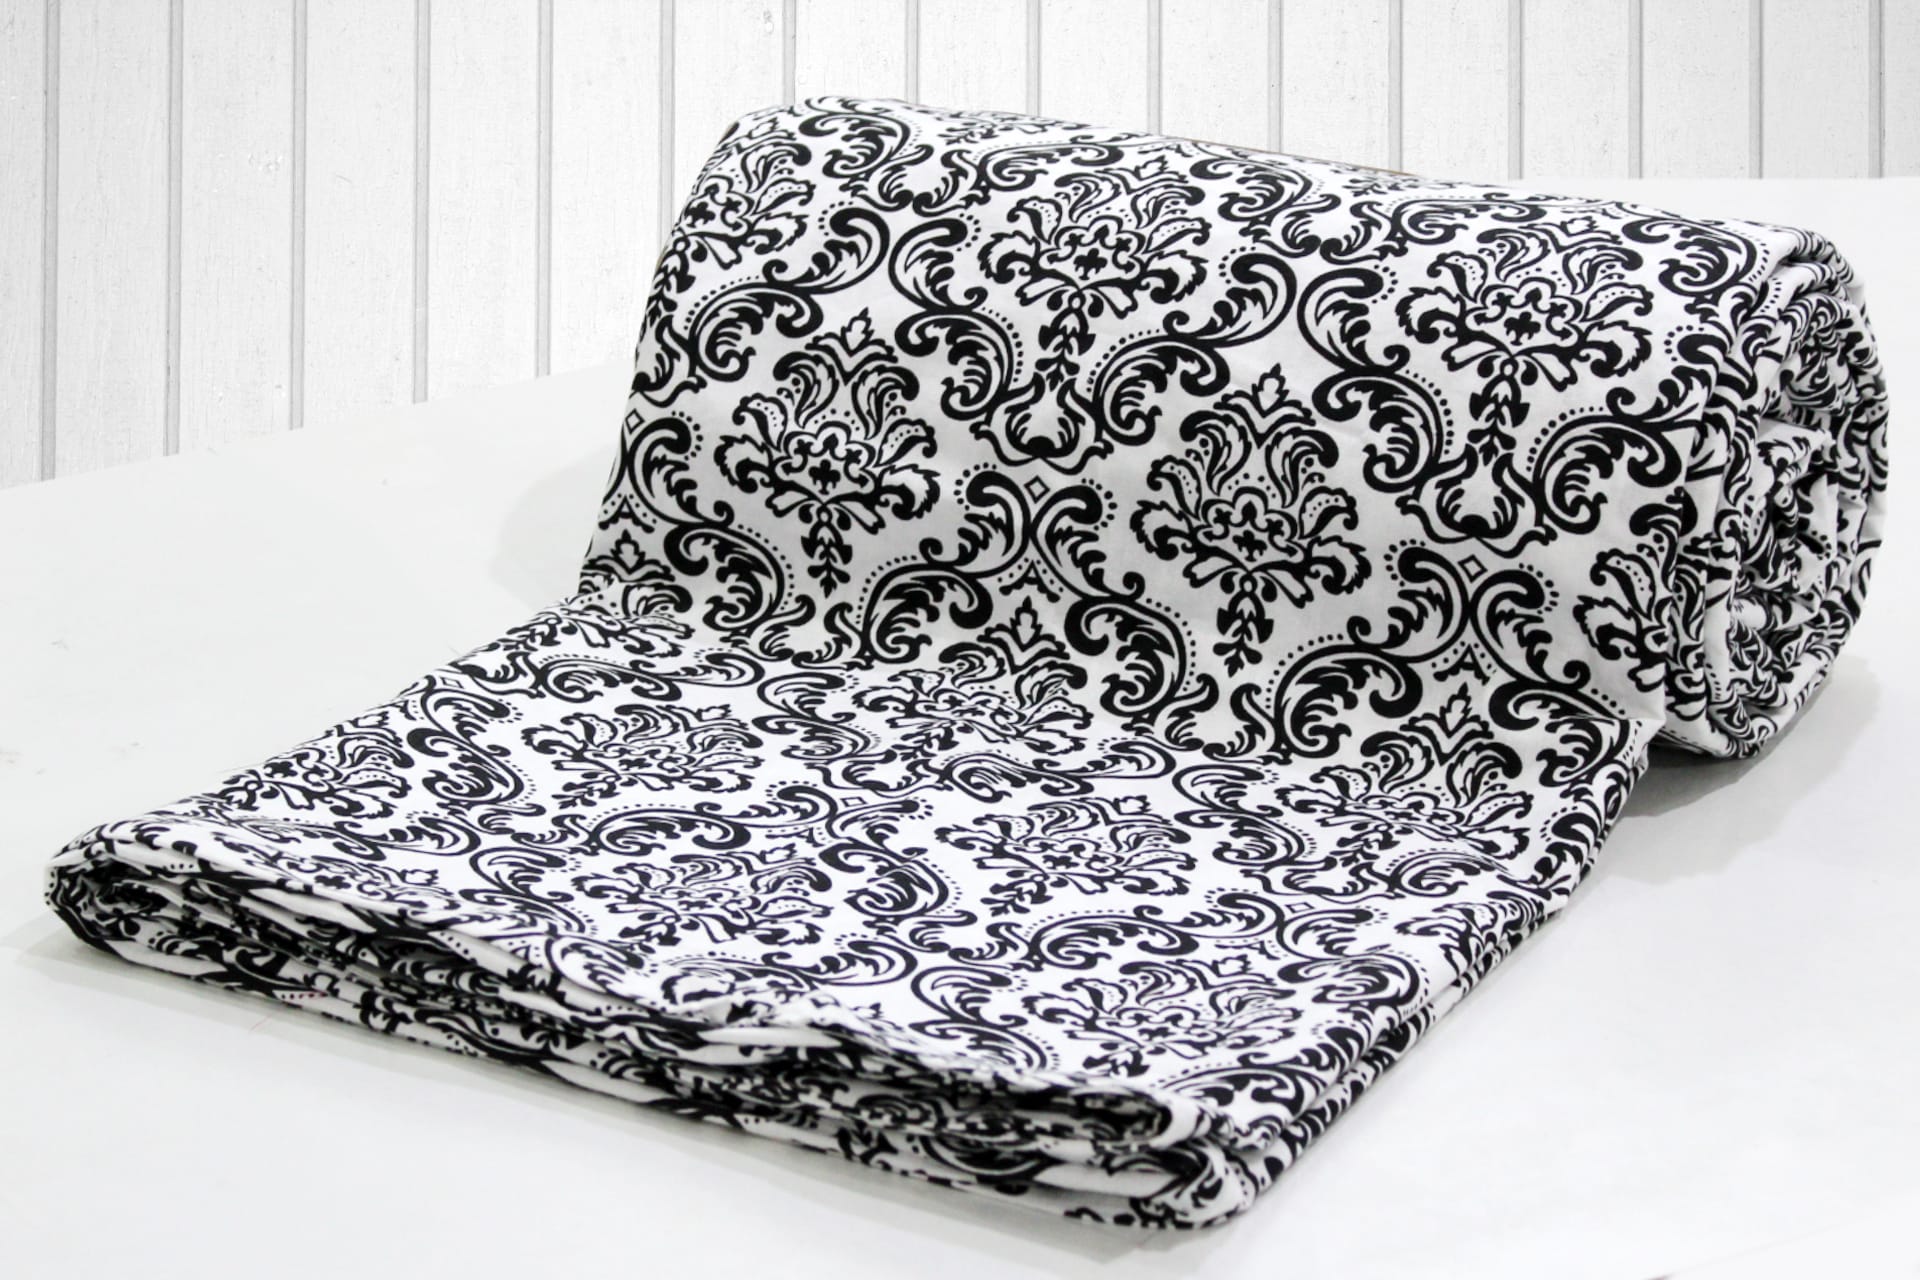 Comfortable 144 TC Printed Cotton Duvet Cover online in India